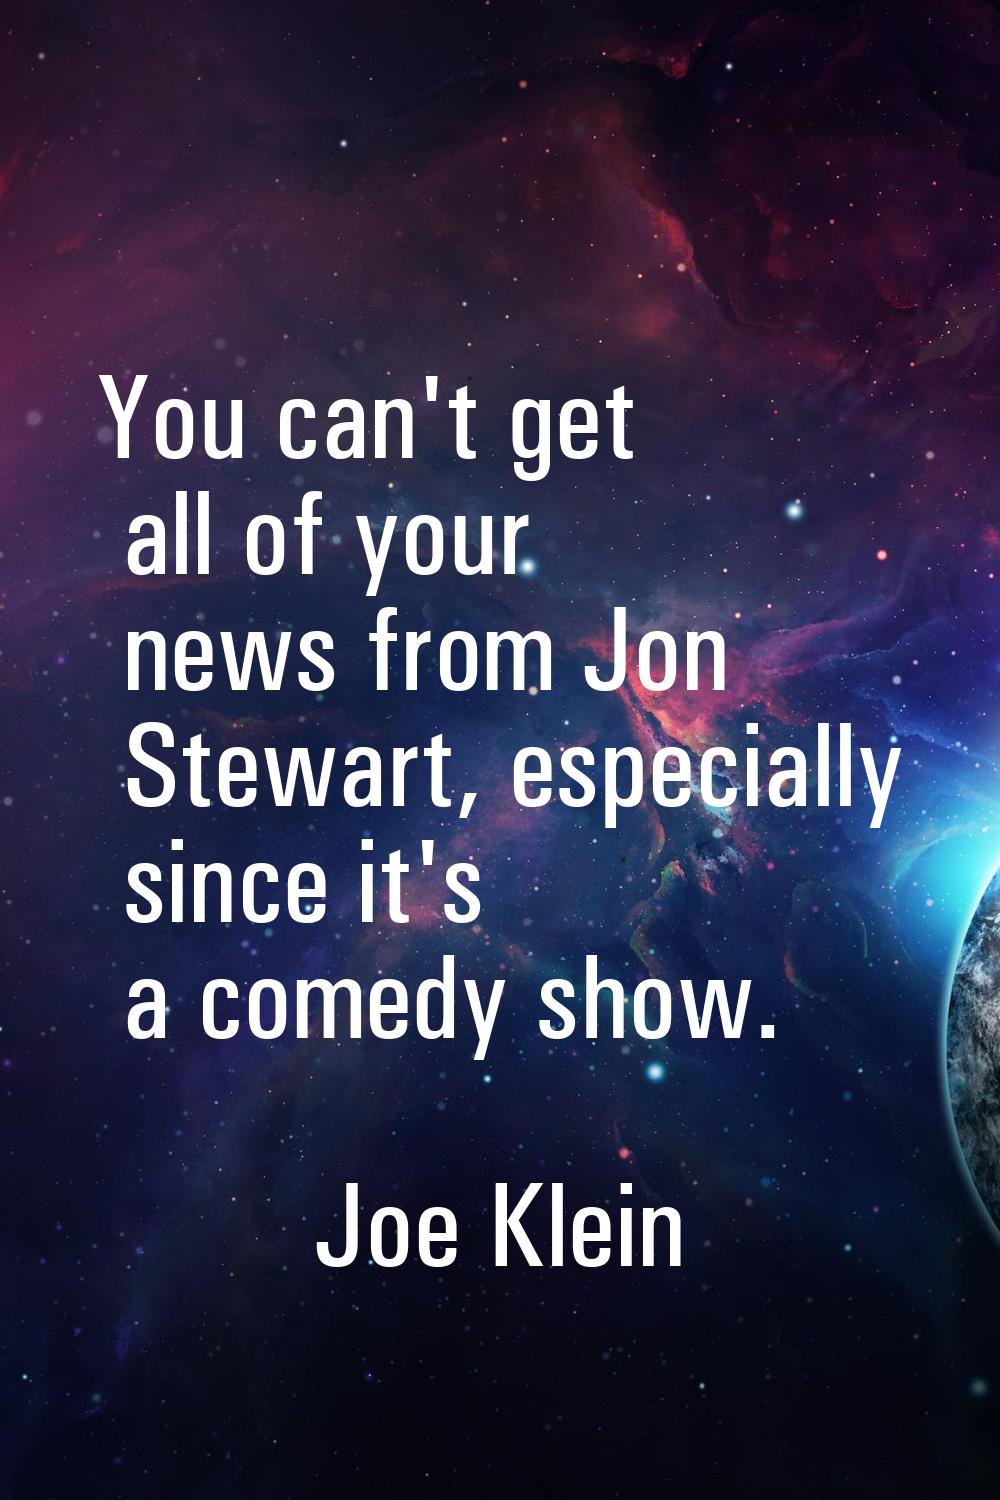 You can't get all of your news from Jon Stewart, especially since it's a comedy show.